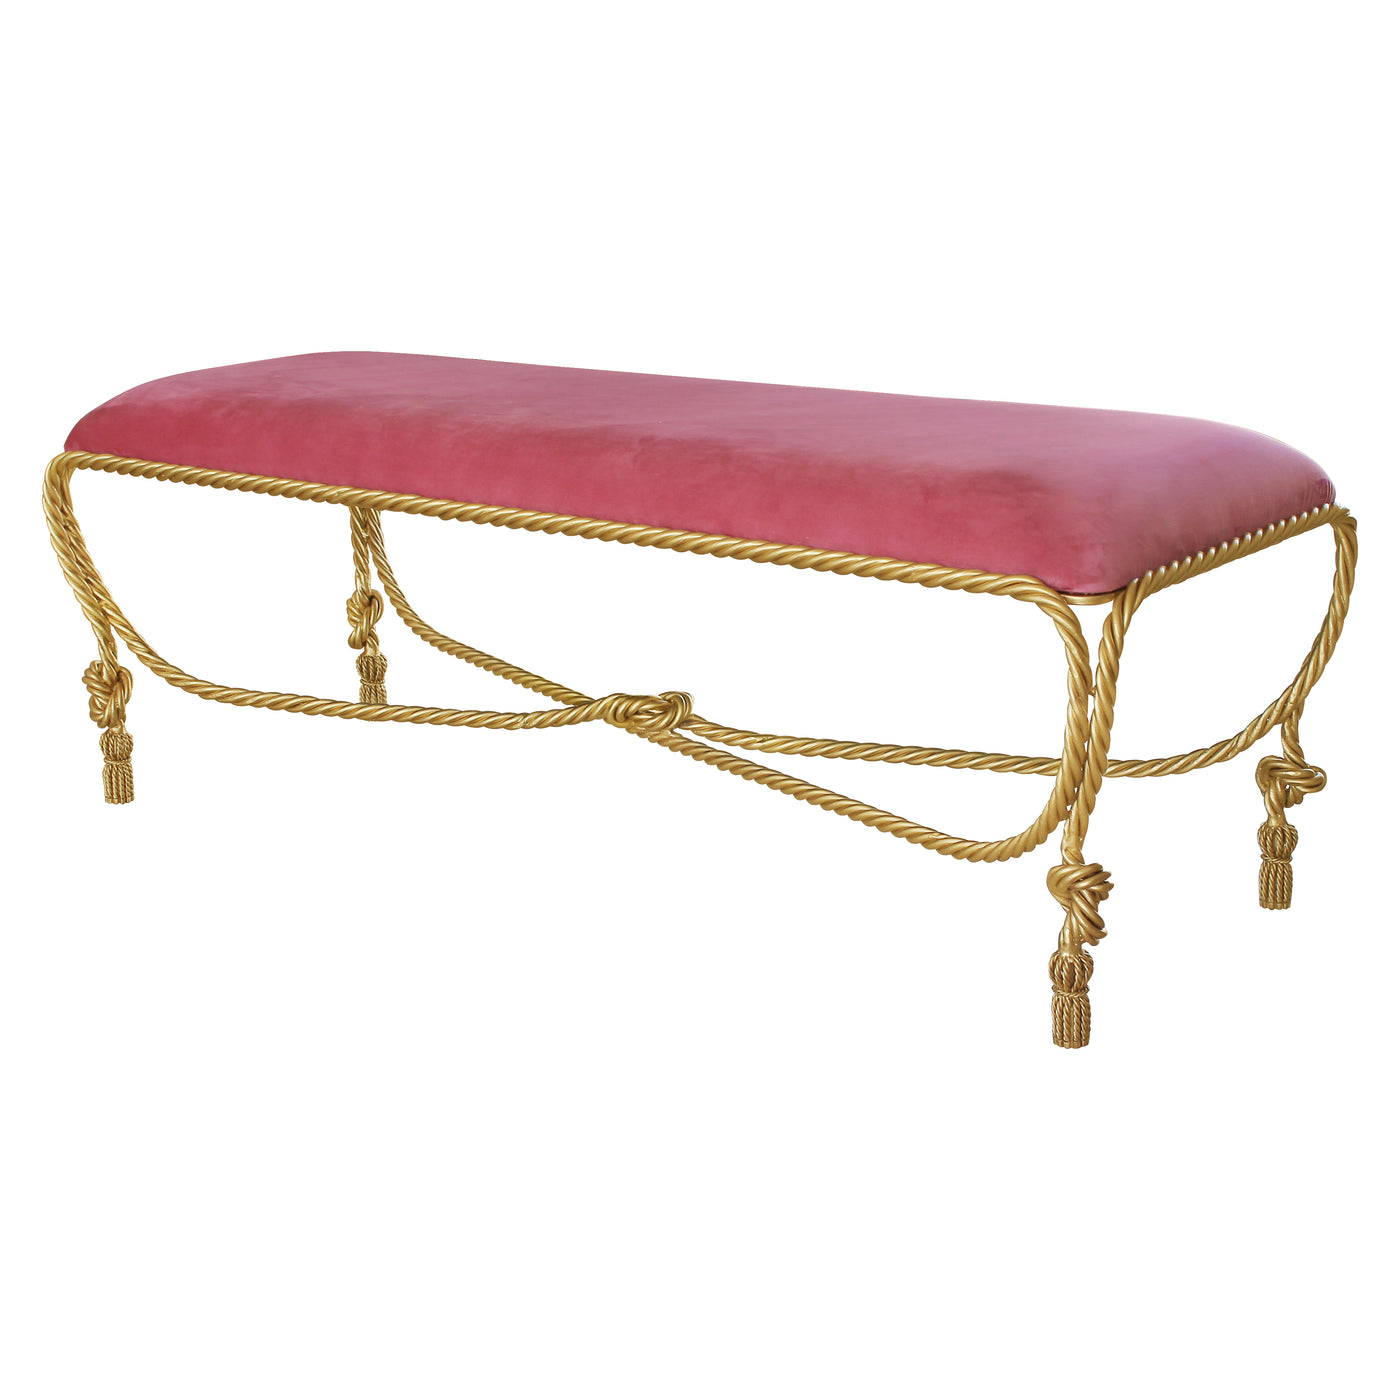 A unique metal golden bench with rope styled legs, topped with a pink velvet cushion